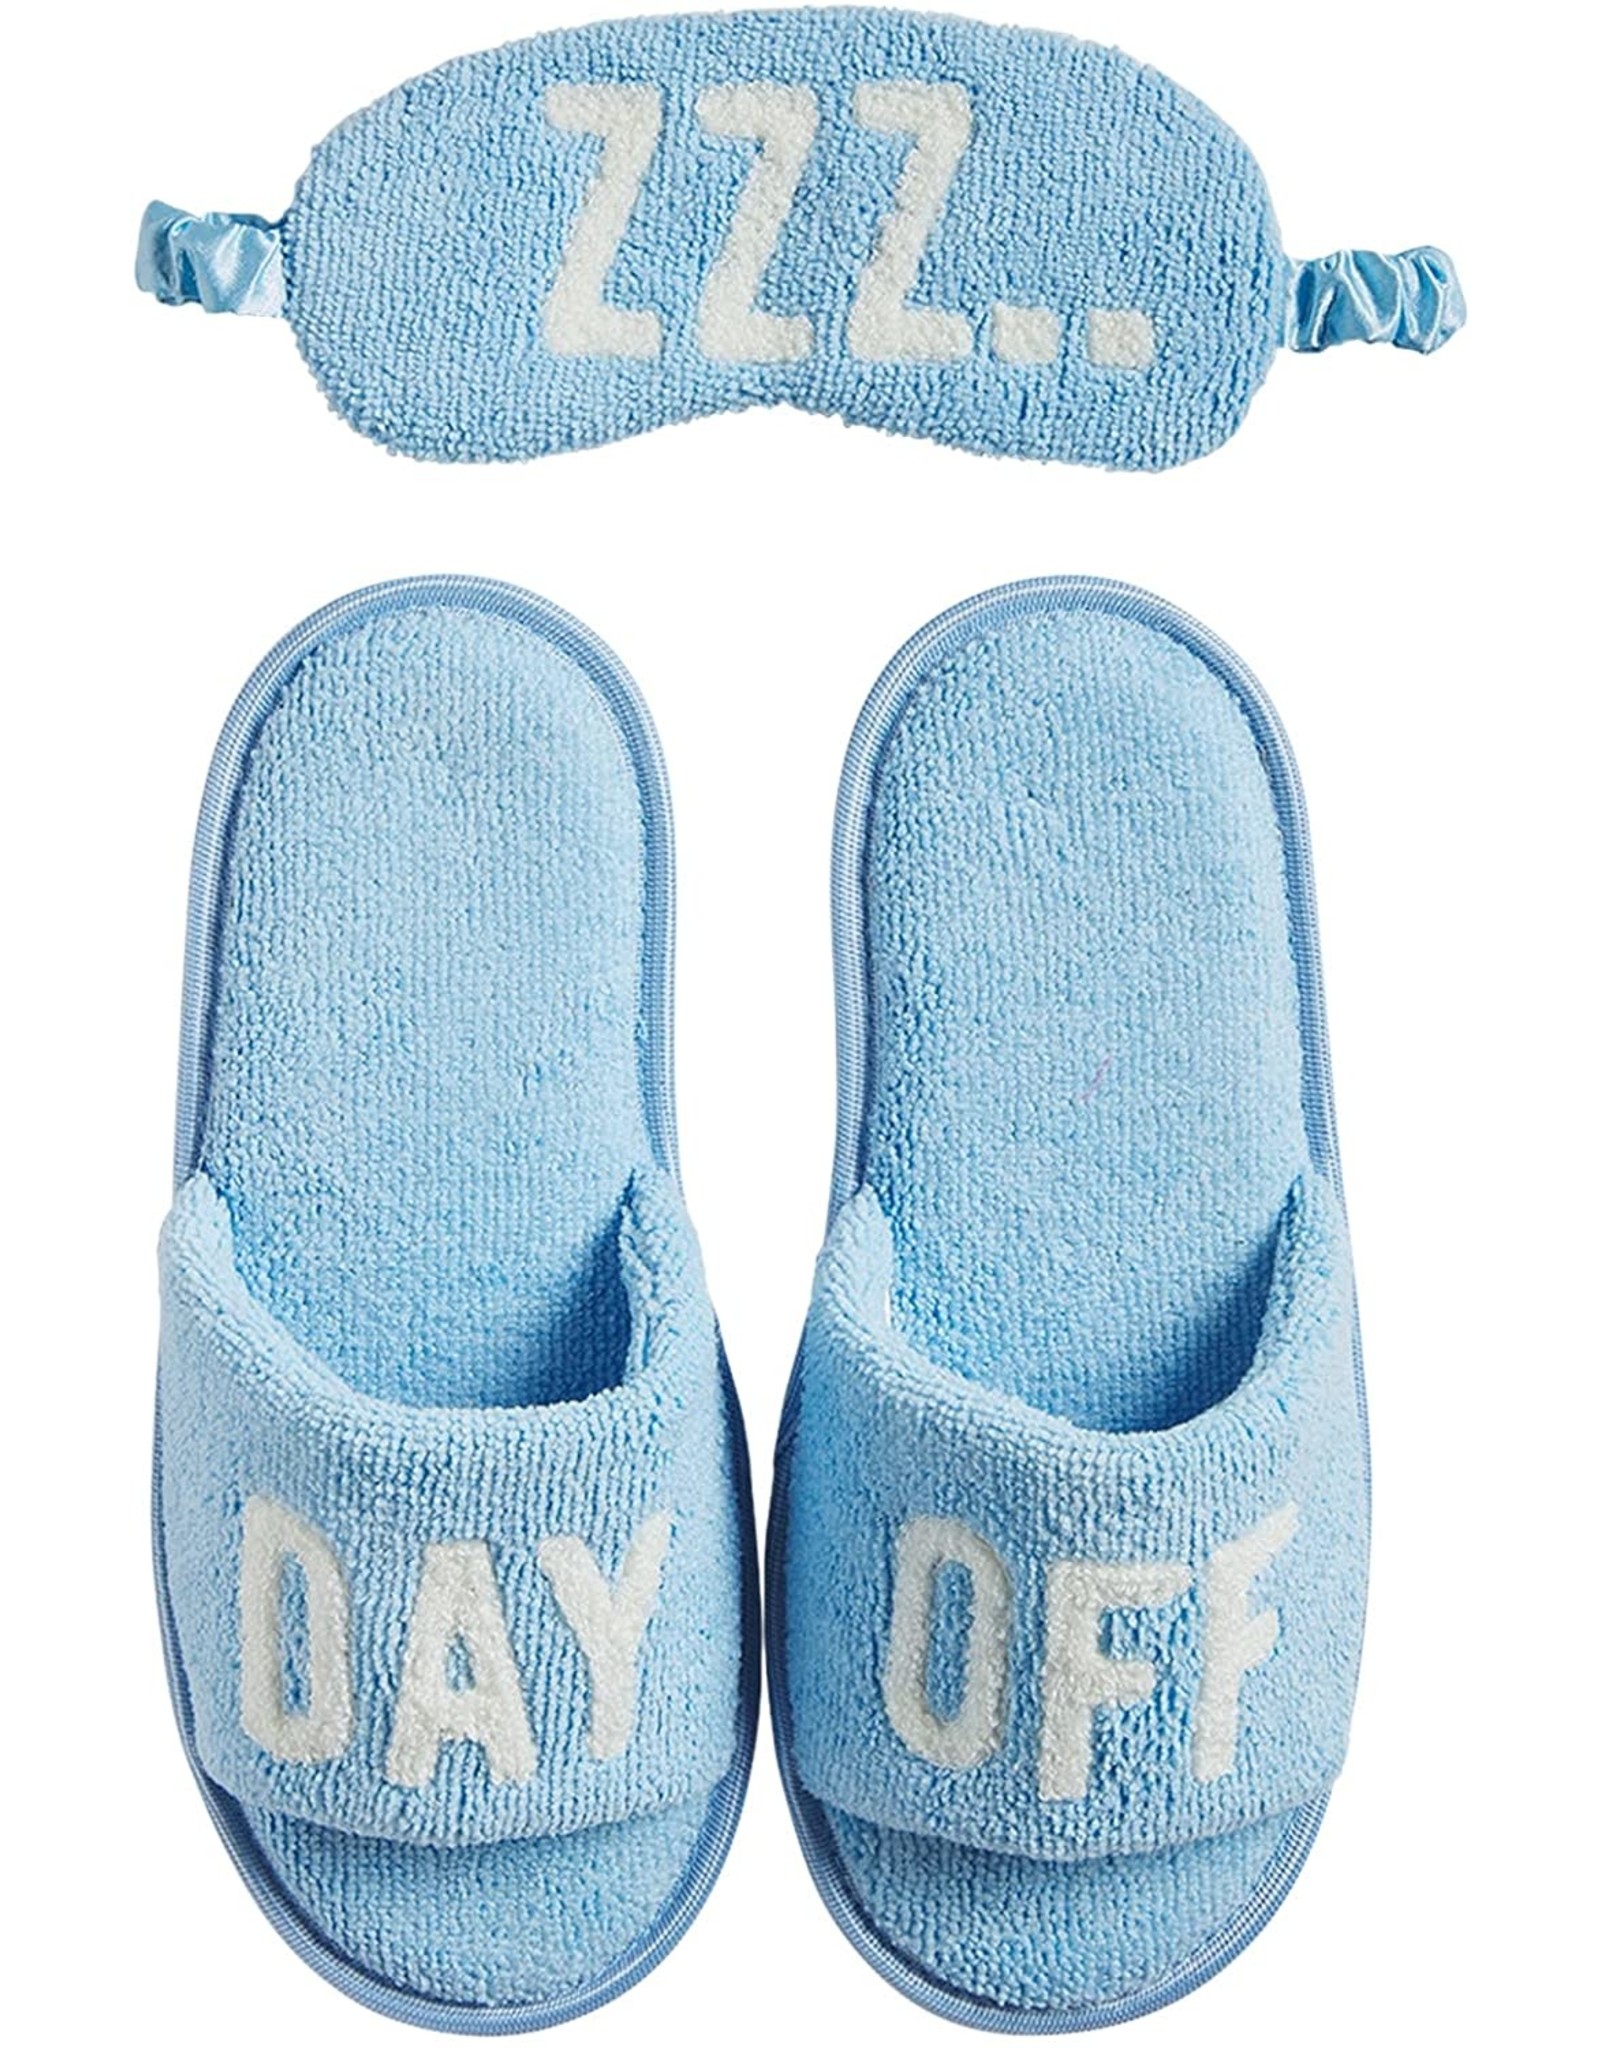 Share more than 72 white and blue slippers latest